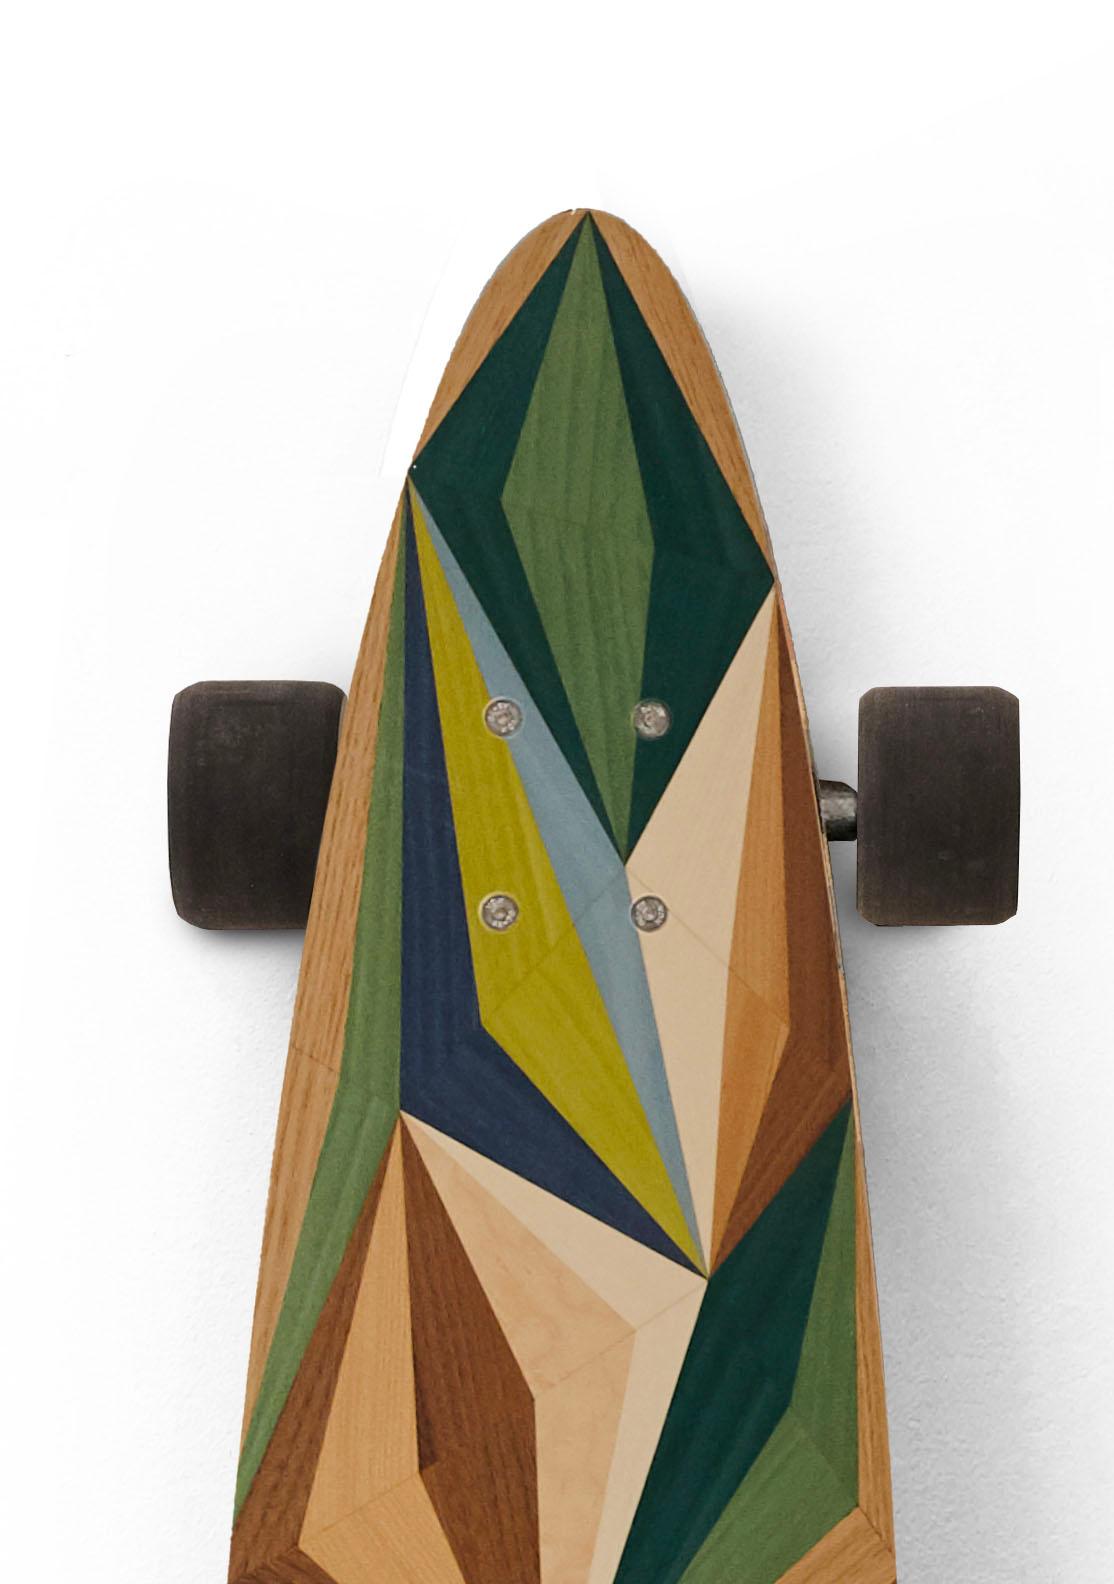 This marquetry skateboard from the  w o o d p o p  studio is an example of the type of modern marquetry that  w o o d p o p  is becoming synonymous with.  Since its inception 10 years ago - the studio has specialised in marquetry and inlay work;